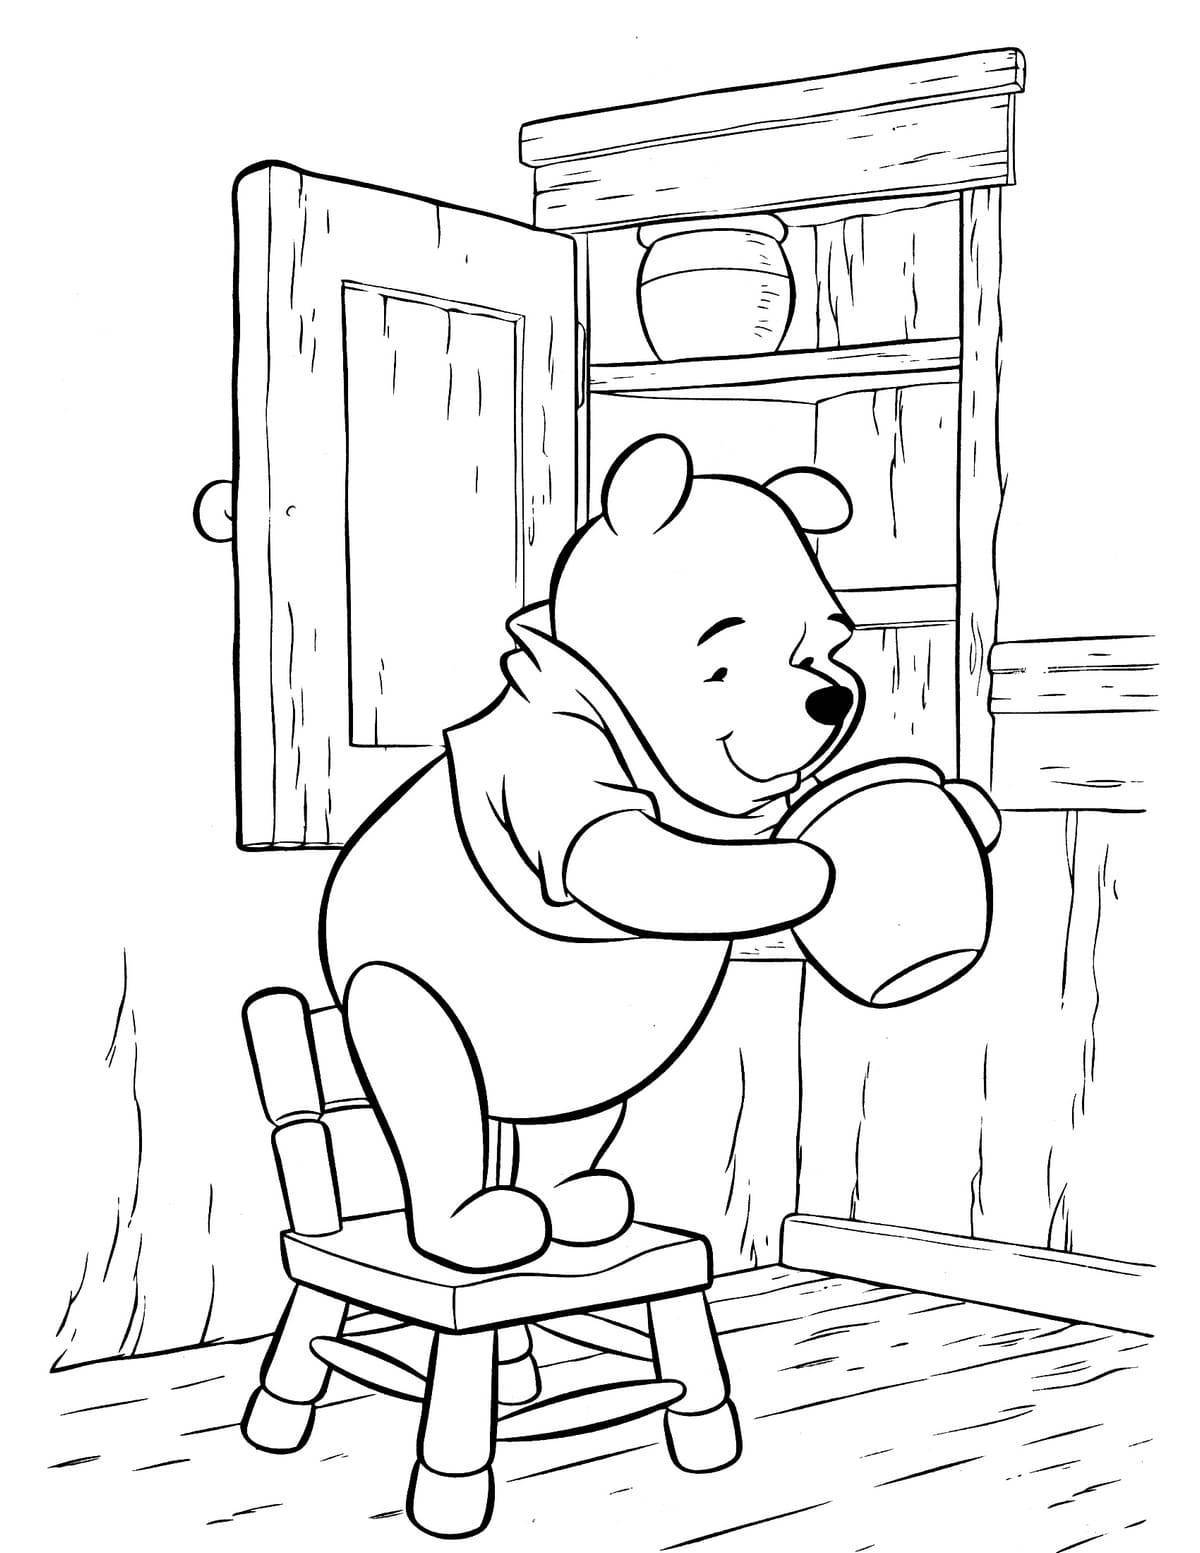 Winnie the Pooh playful coloring